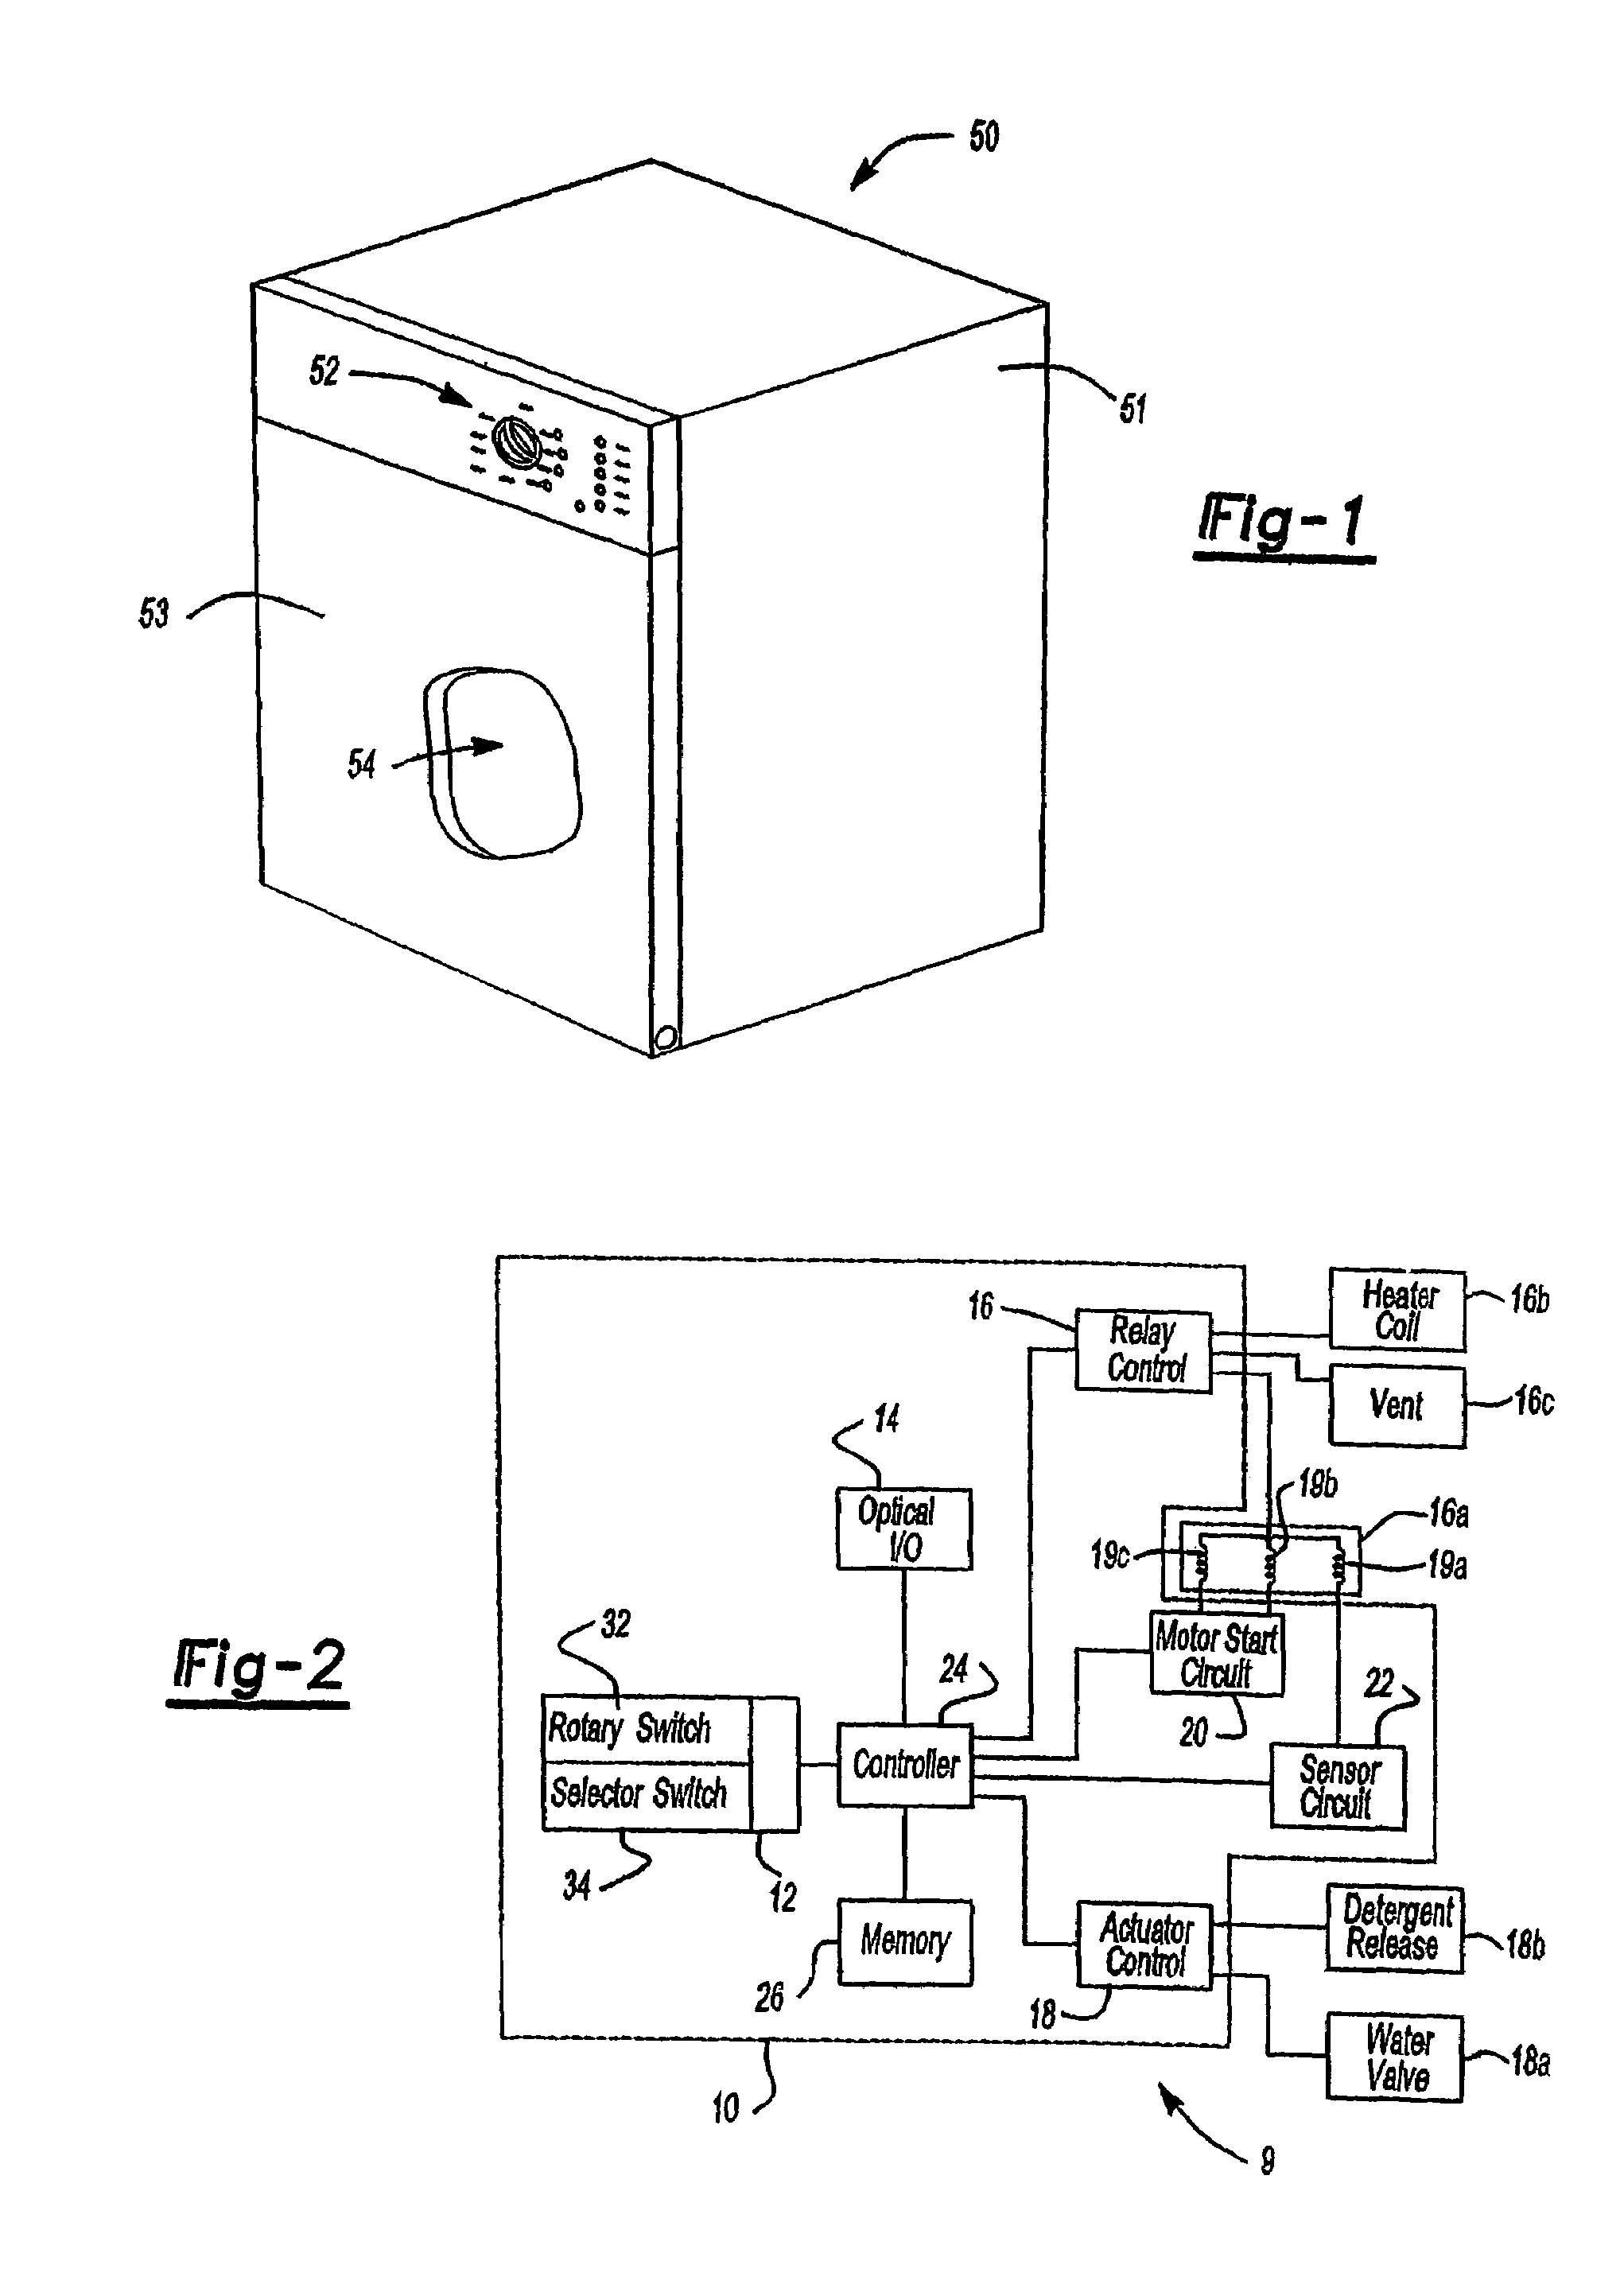 Method and apparatus for enabling optical communication through low intensity indicators in an appliance that uses a vacuum fluorescent display